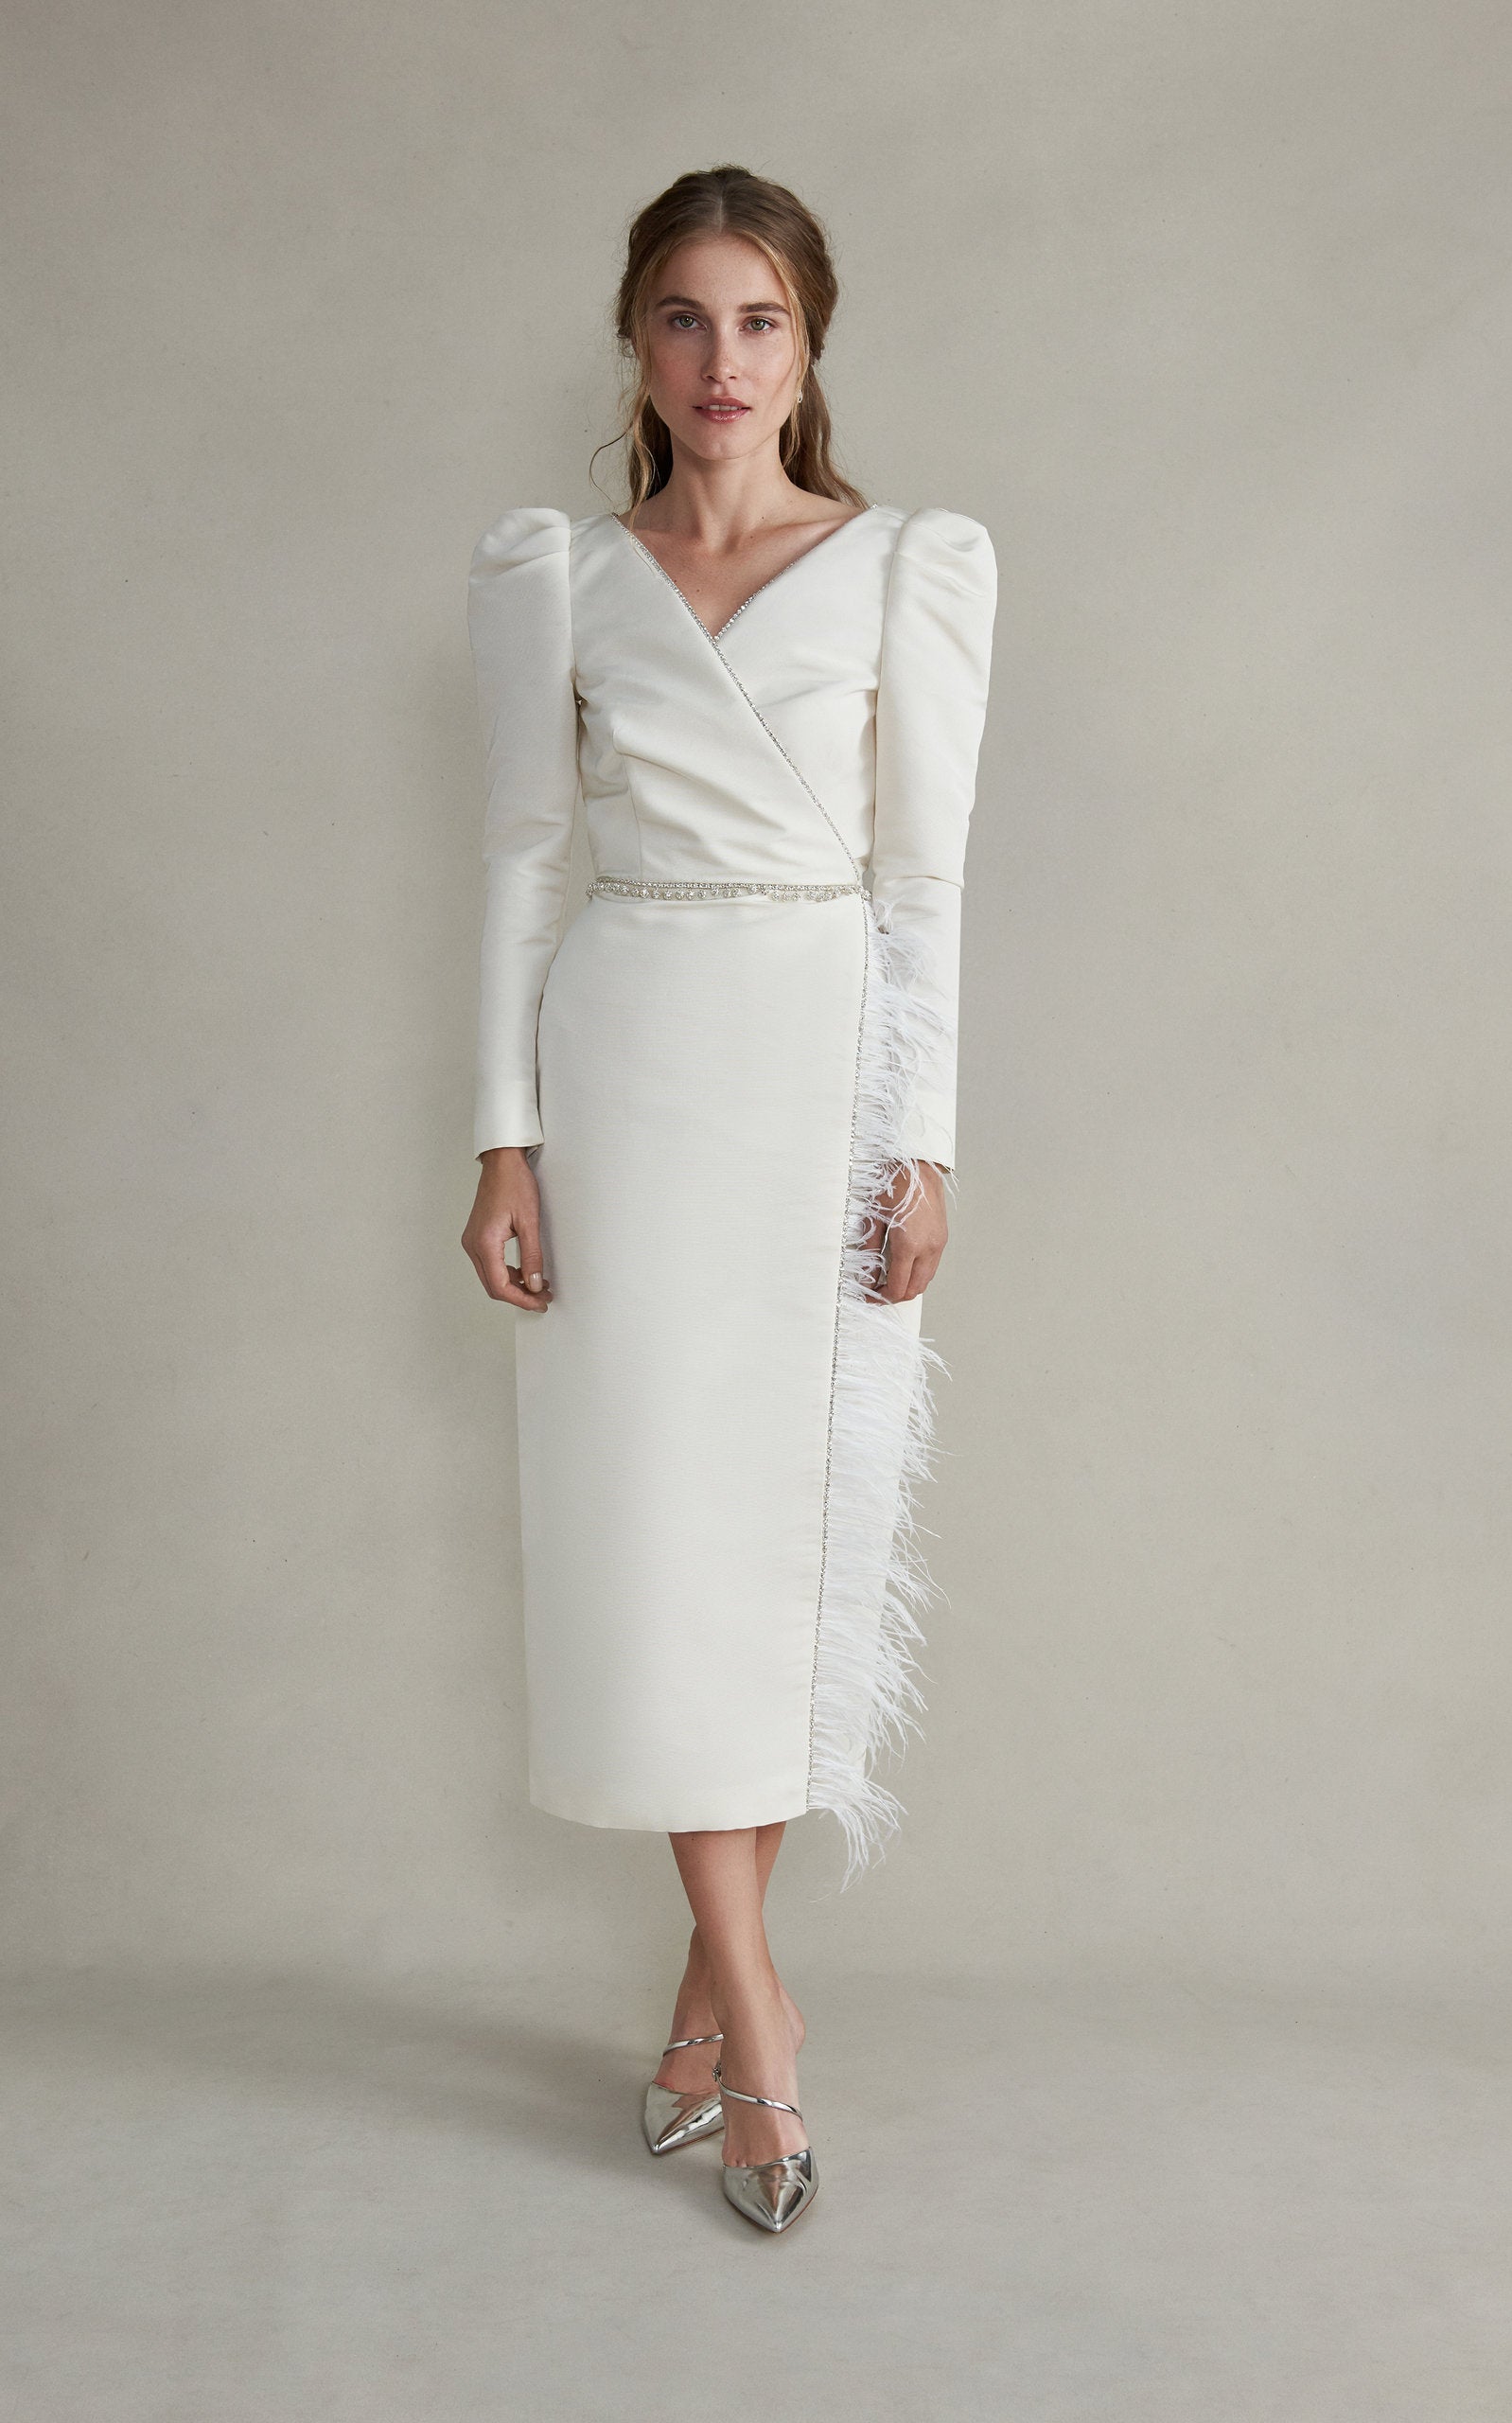 Artemis White Silk Dress with Feather Detailing